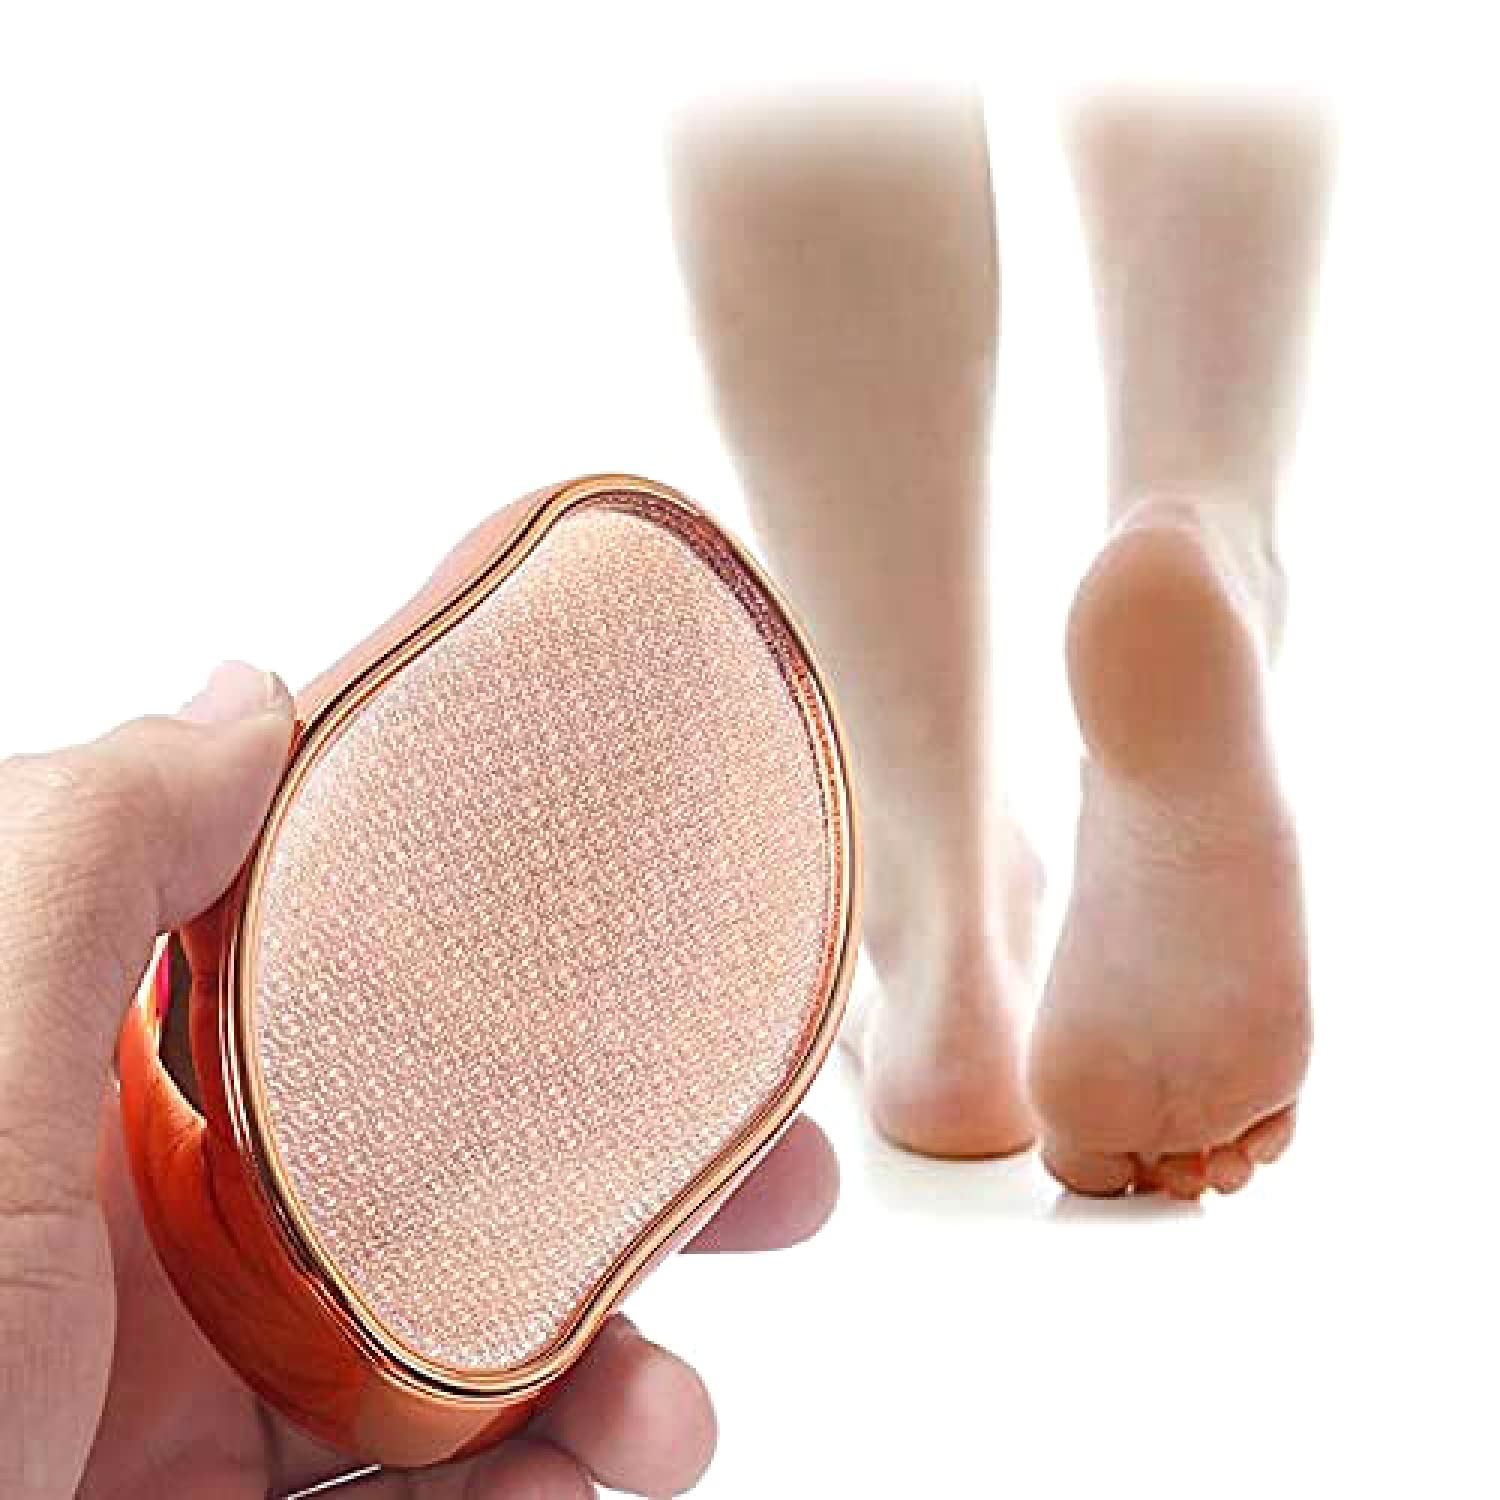 Dr Foot Glass File Callus Remover | For Feet, Dead Skin, Callus Remover | NANO GLASS CRYSTAL Removes Hard Skin, Leaves Feet Smooth | Foot Scraper Rasp LATEST INNOVATION - ROSE GOLD (Pack of 10)